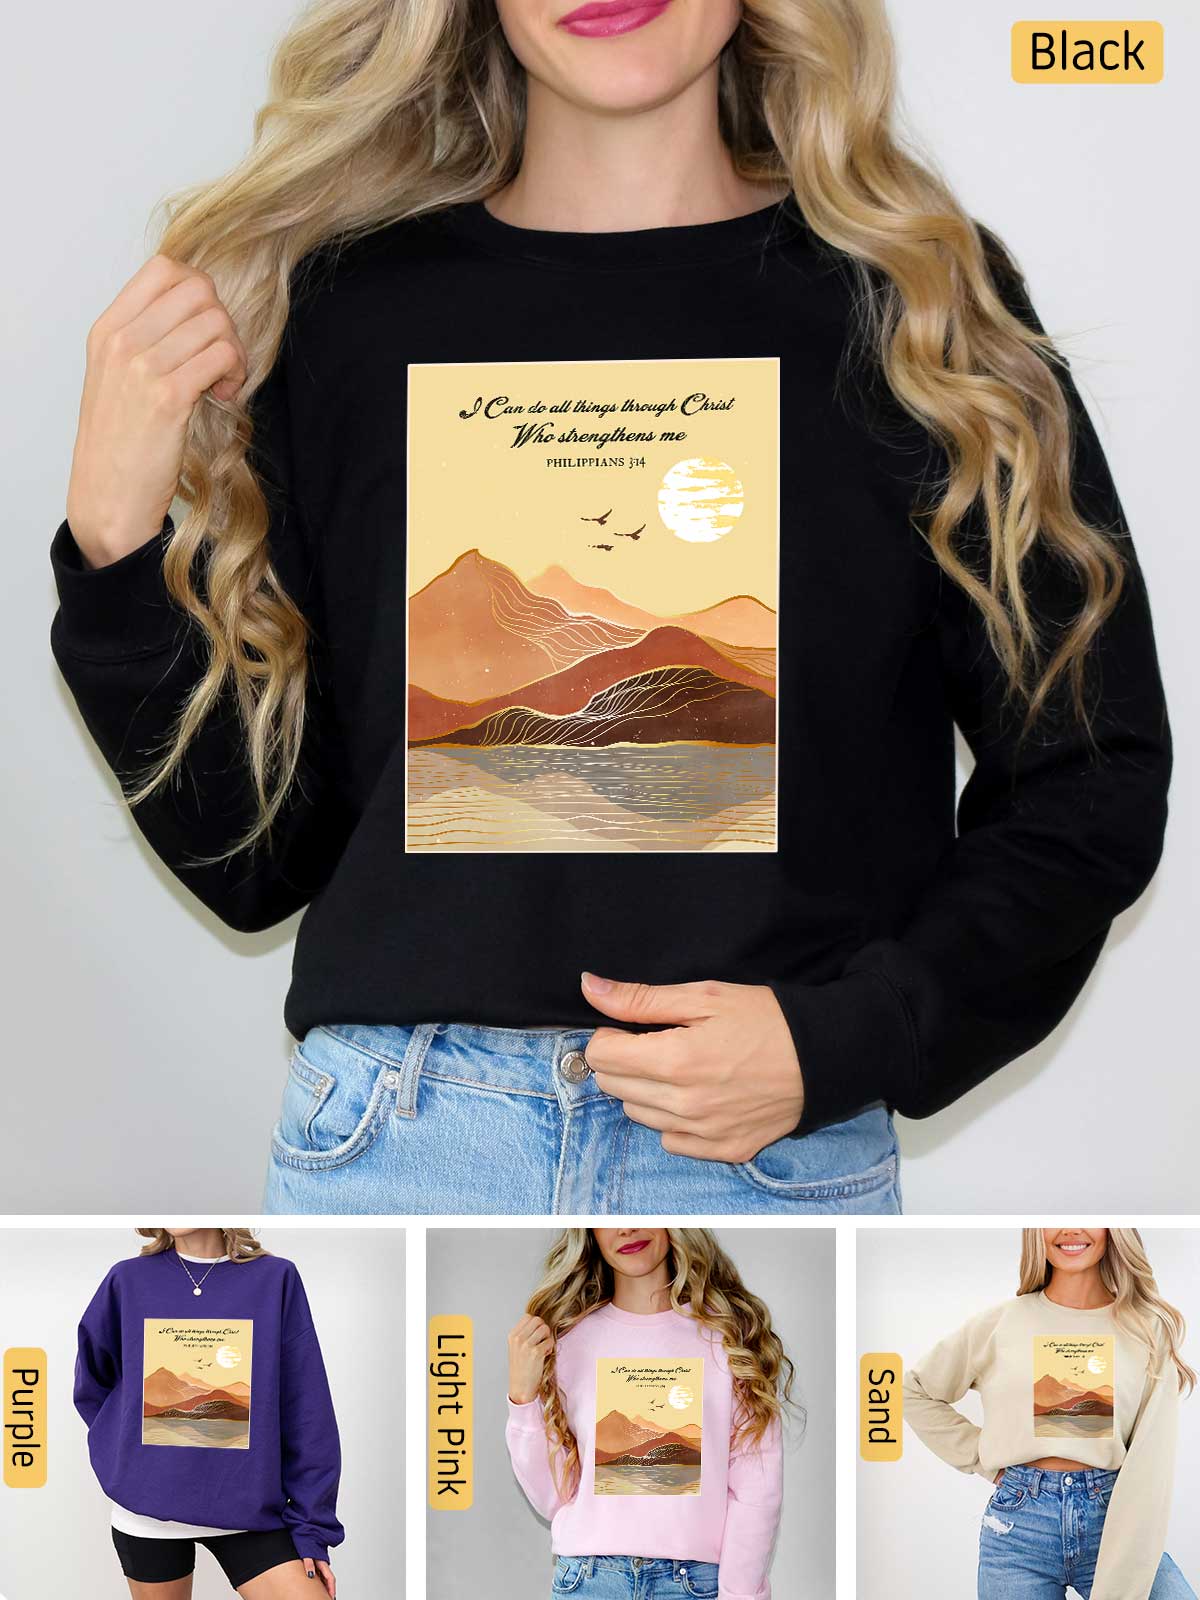 a woman wearing a black sweatshirt with a picture of mountains on it